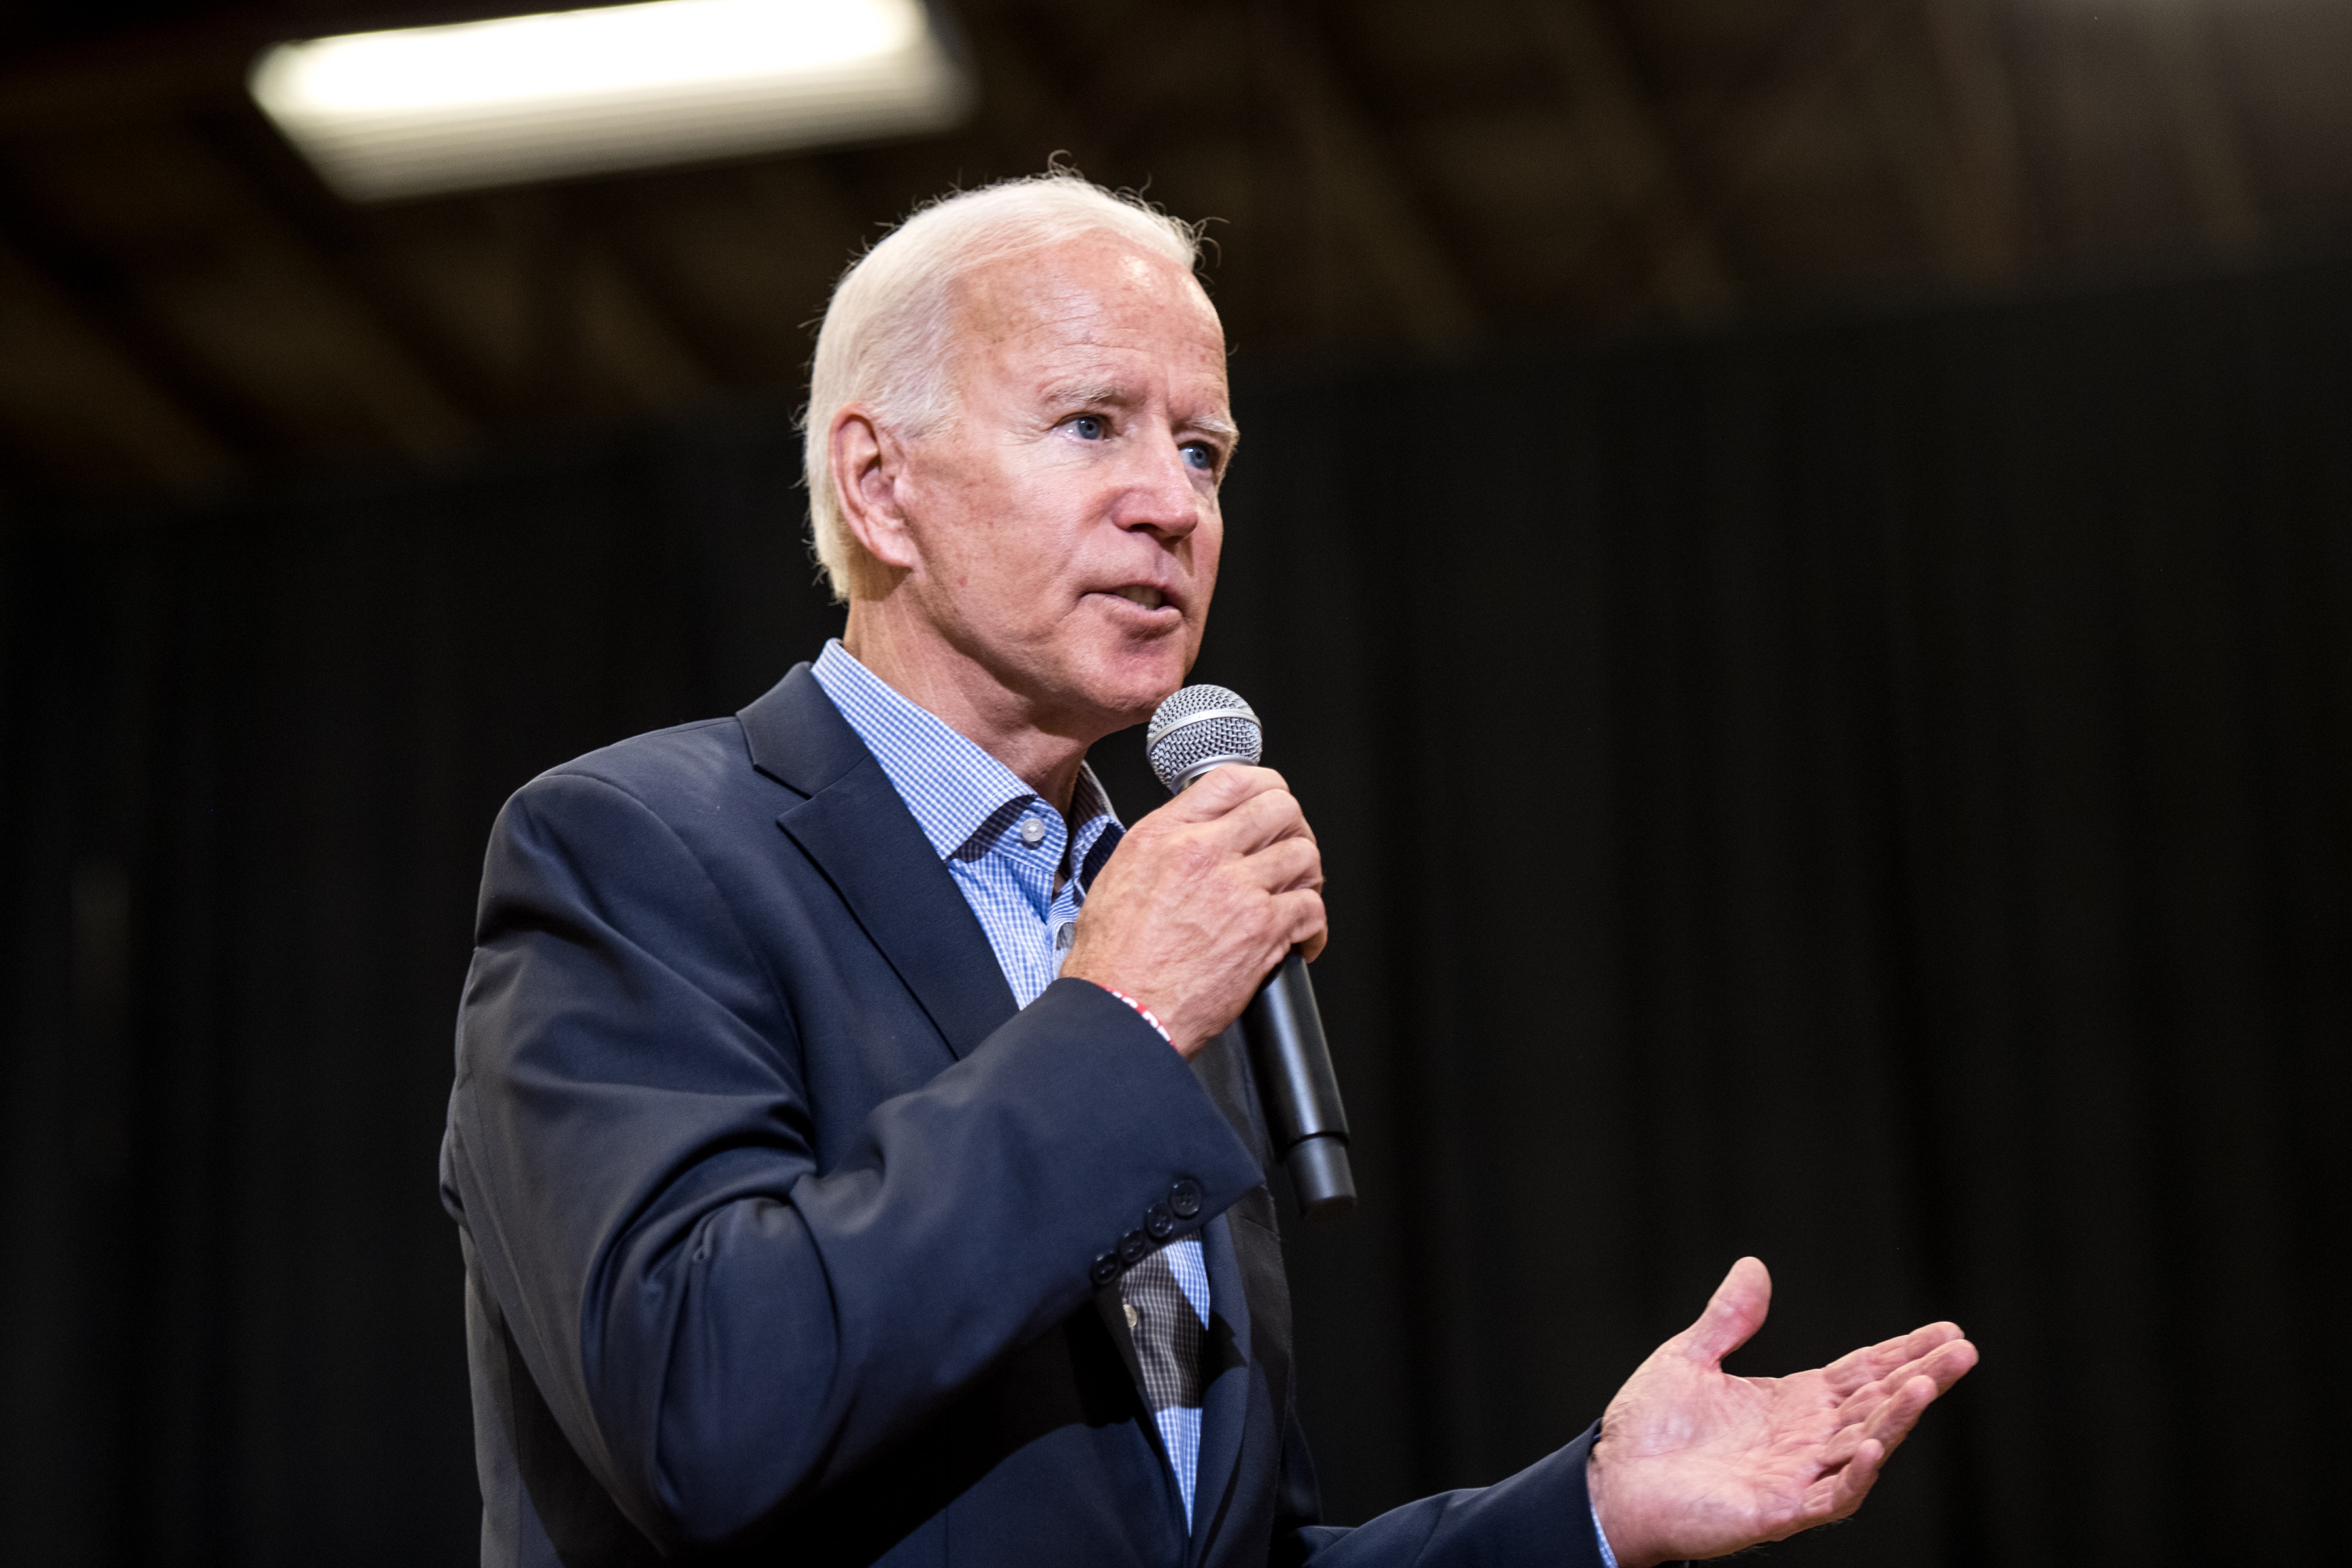 Biden On Gaffes, Inaccuracies: 'Details Are Irrelevant' To Policy Decisions